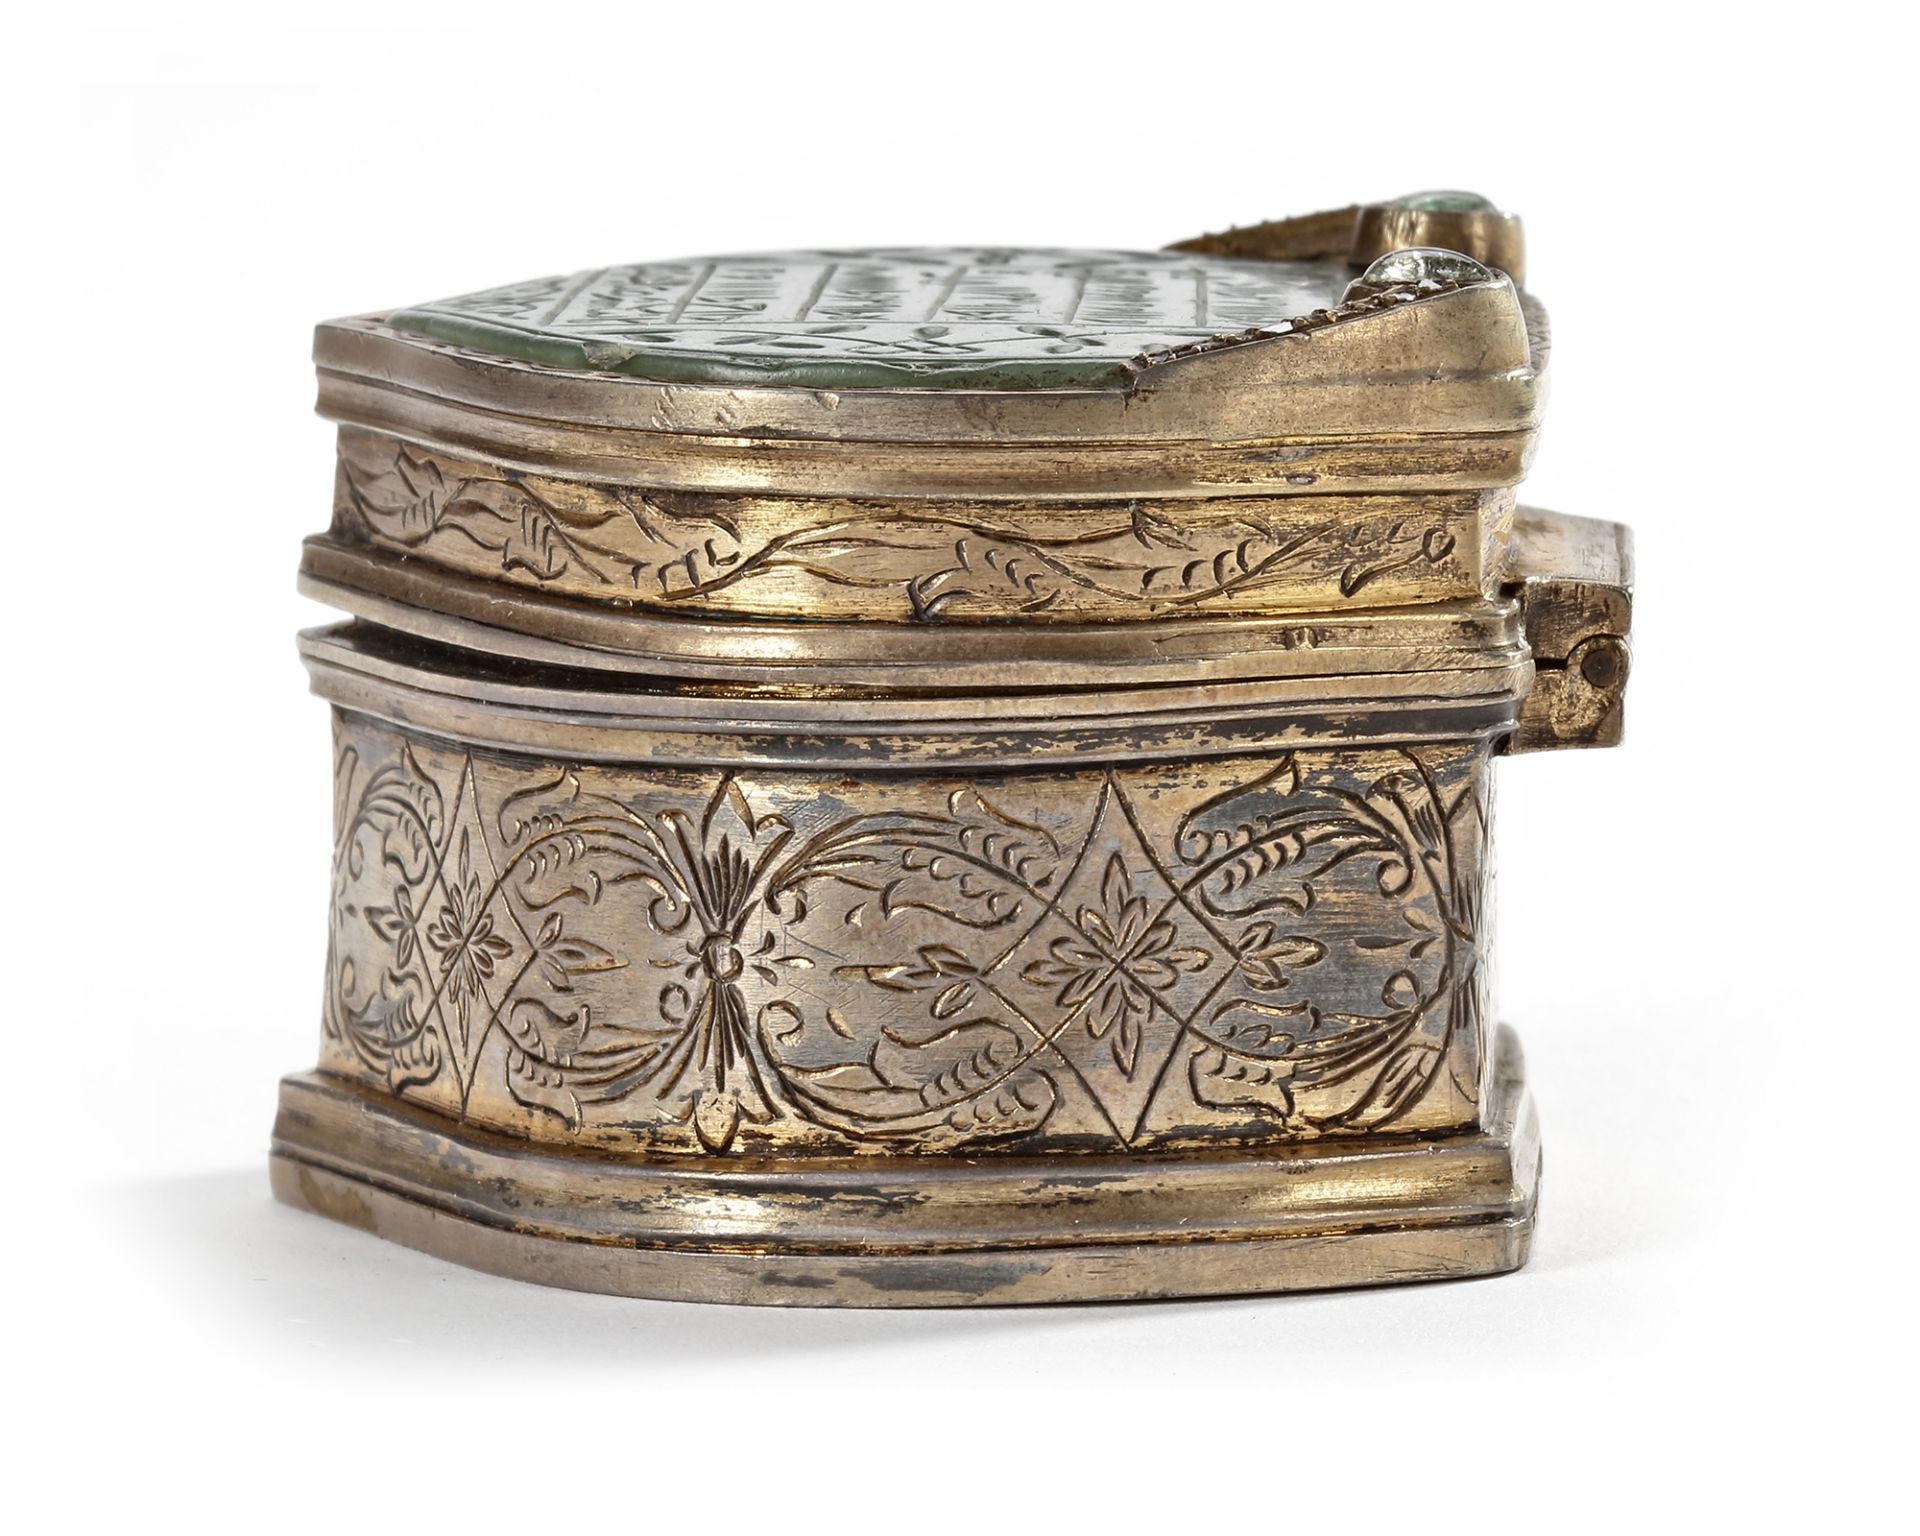 AN OTTOMAN JADE AND GEM-SET SILVER PLATED CASKET, 16TH CENTURY - Image 3 of 12